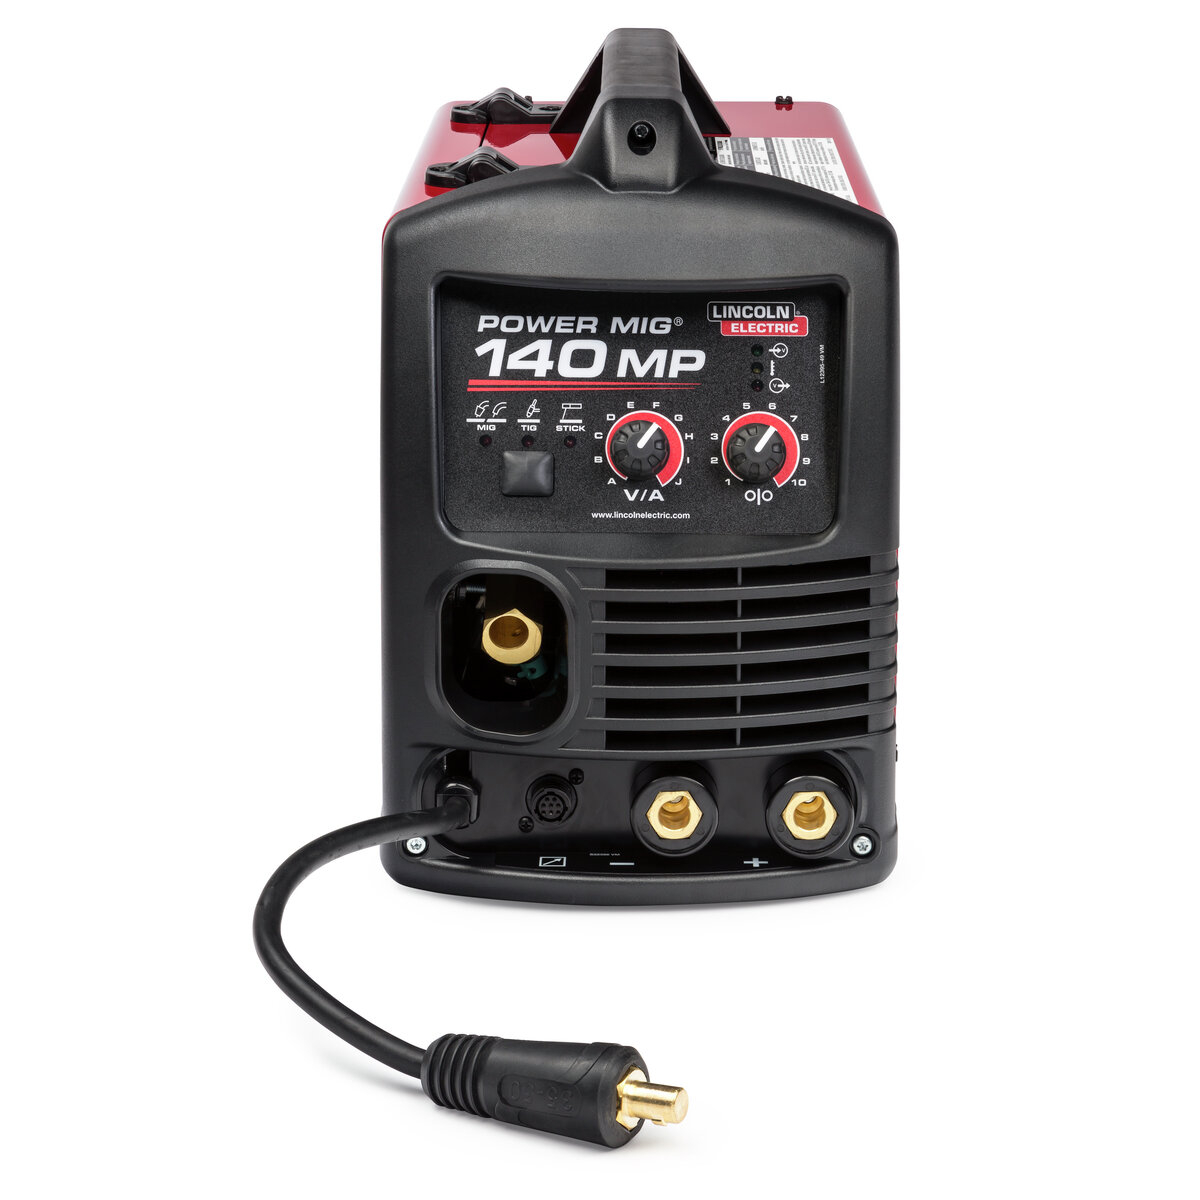 Lincoln Electric Power MIG 140MP multi-process welder #K4498-1